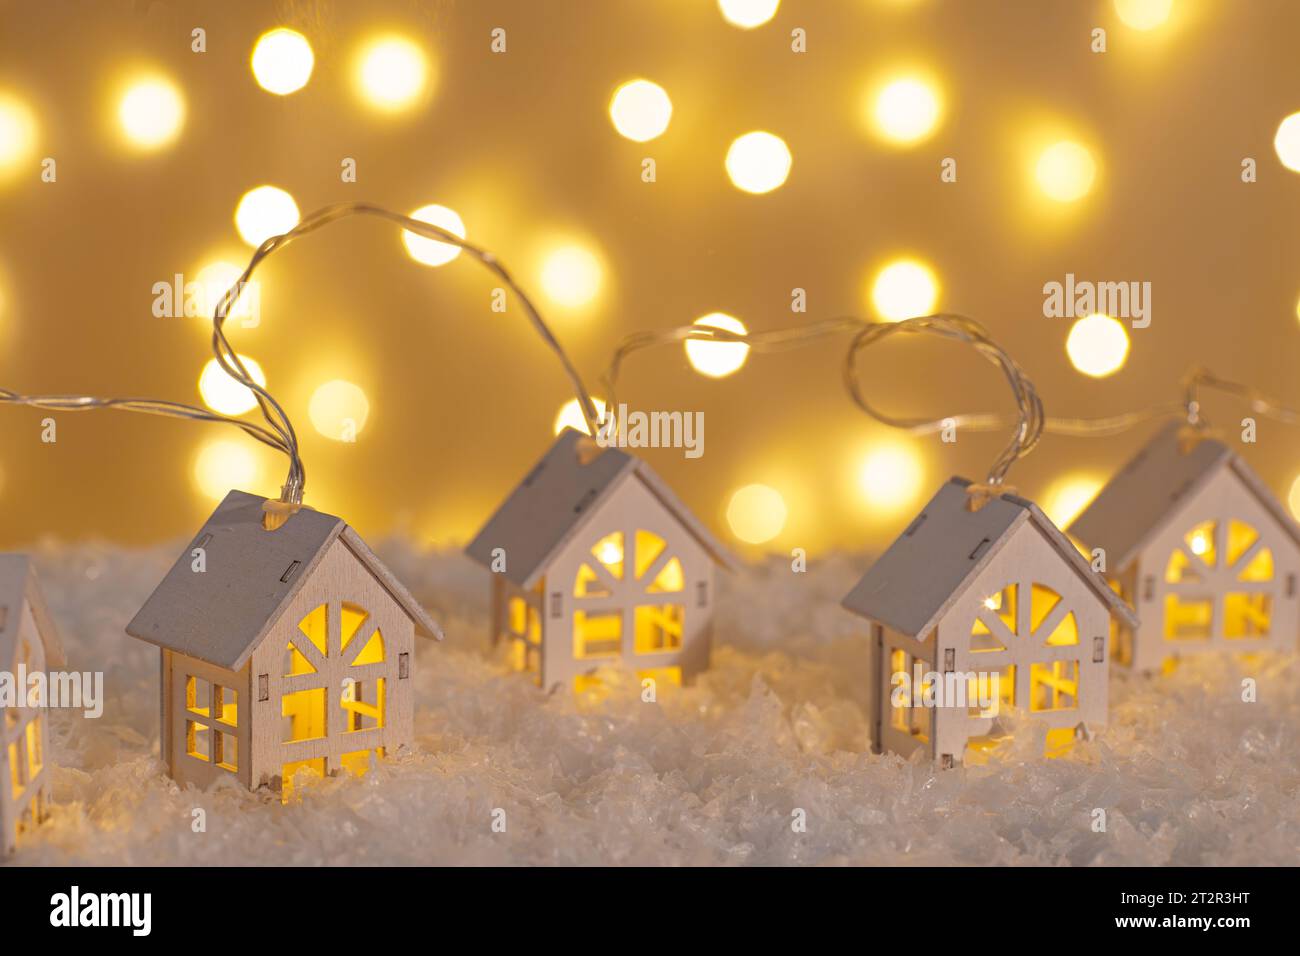 Wooden houses garland string lights on snow and glowing lights bokeh background. Christmas, New Year greeting card with copy space. Holiday illuminati Stock Photo